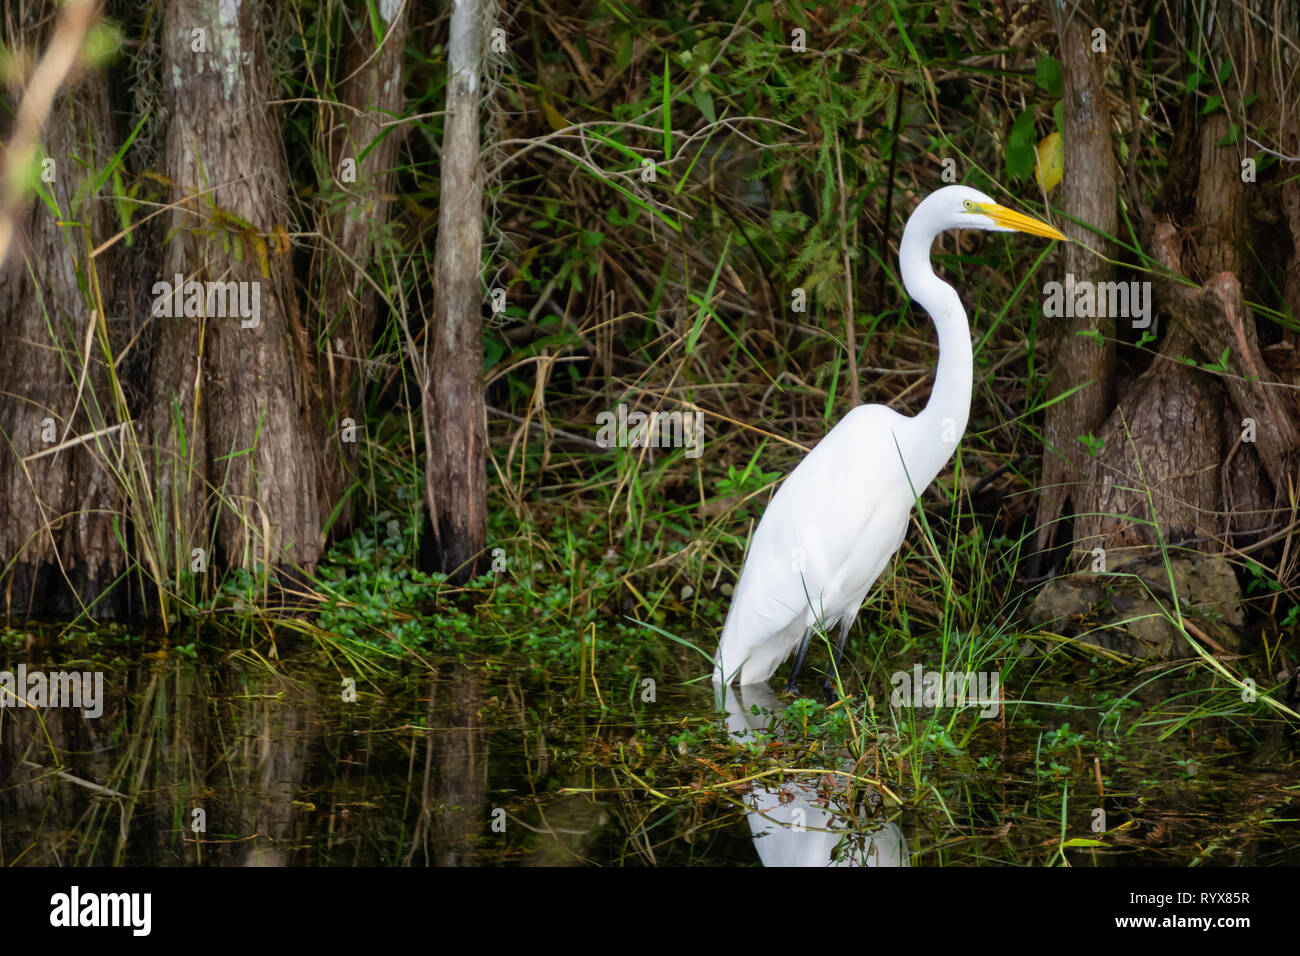 The great egret sitting in water. Taken in Everglades National Park, Florida, United States. Stock Photo